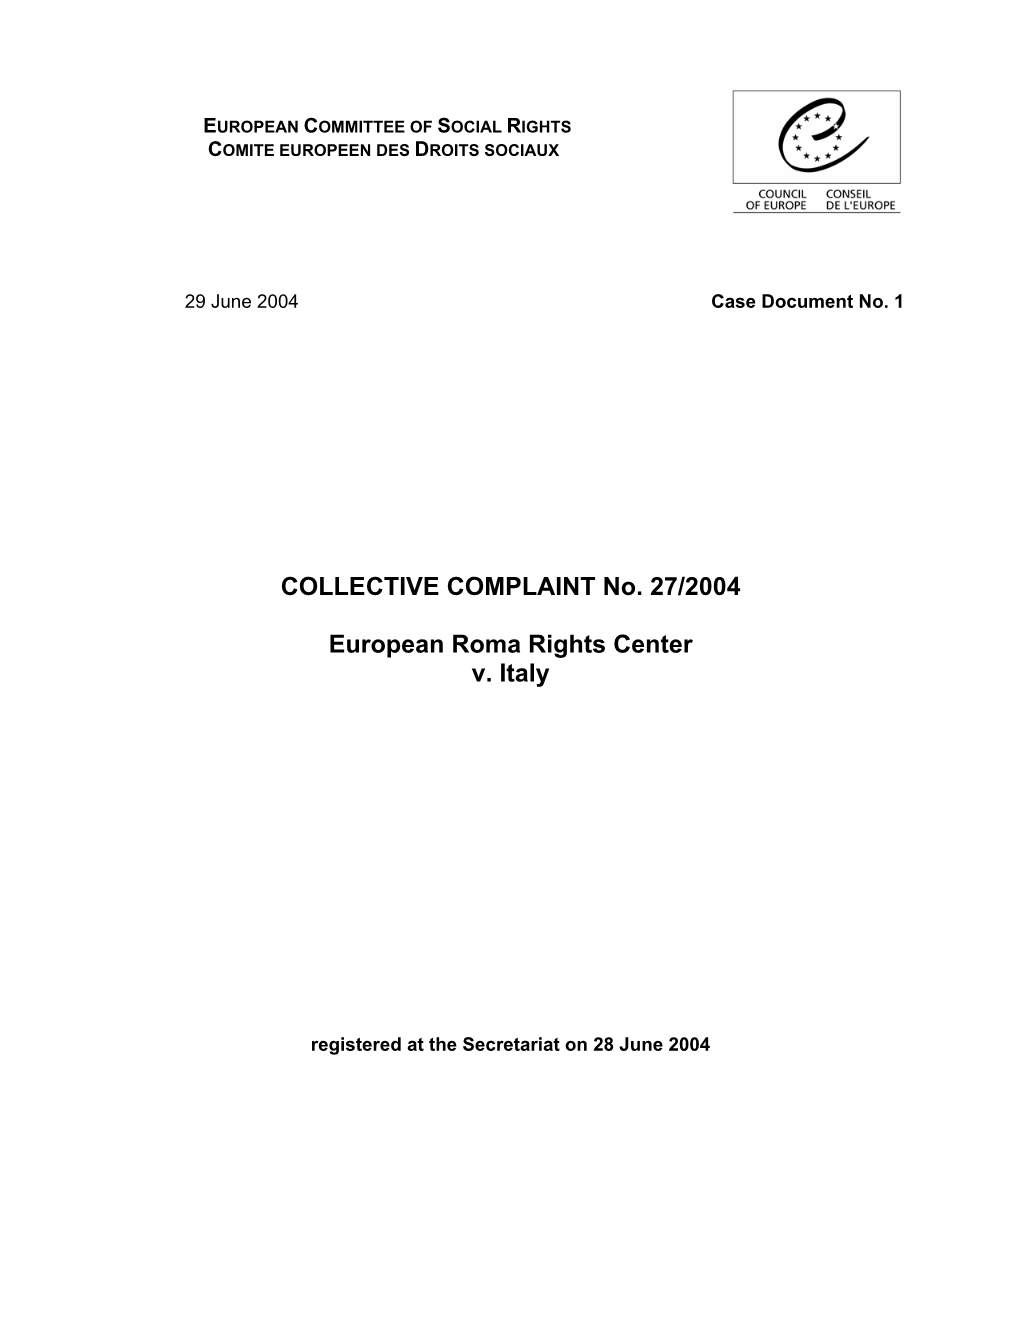 COLLECTIVE COMPLAINT No. 27/2004 European Roma Rights